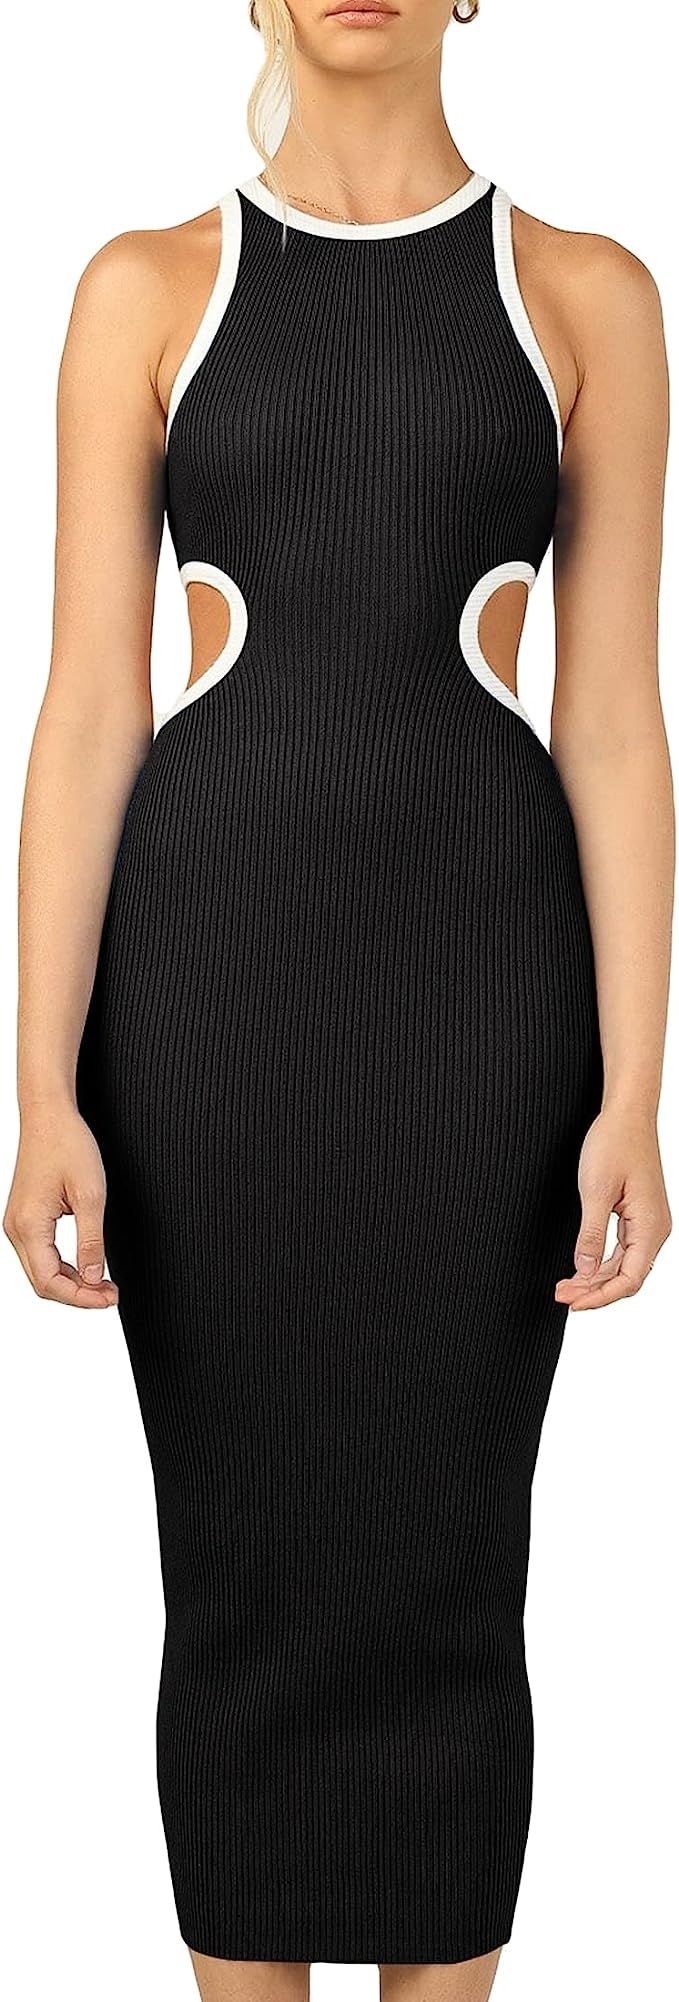 KMOLY Women's Sexy Sleeveless Cut Out Dress Crewneck Bodycon Hollow Backless Knitted Evening Cock... | Amazon (US)